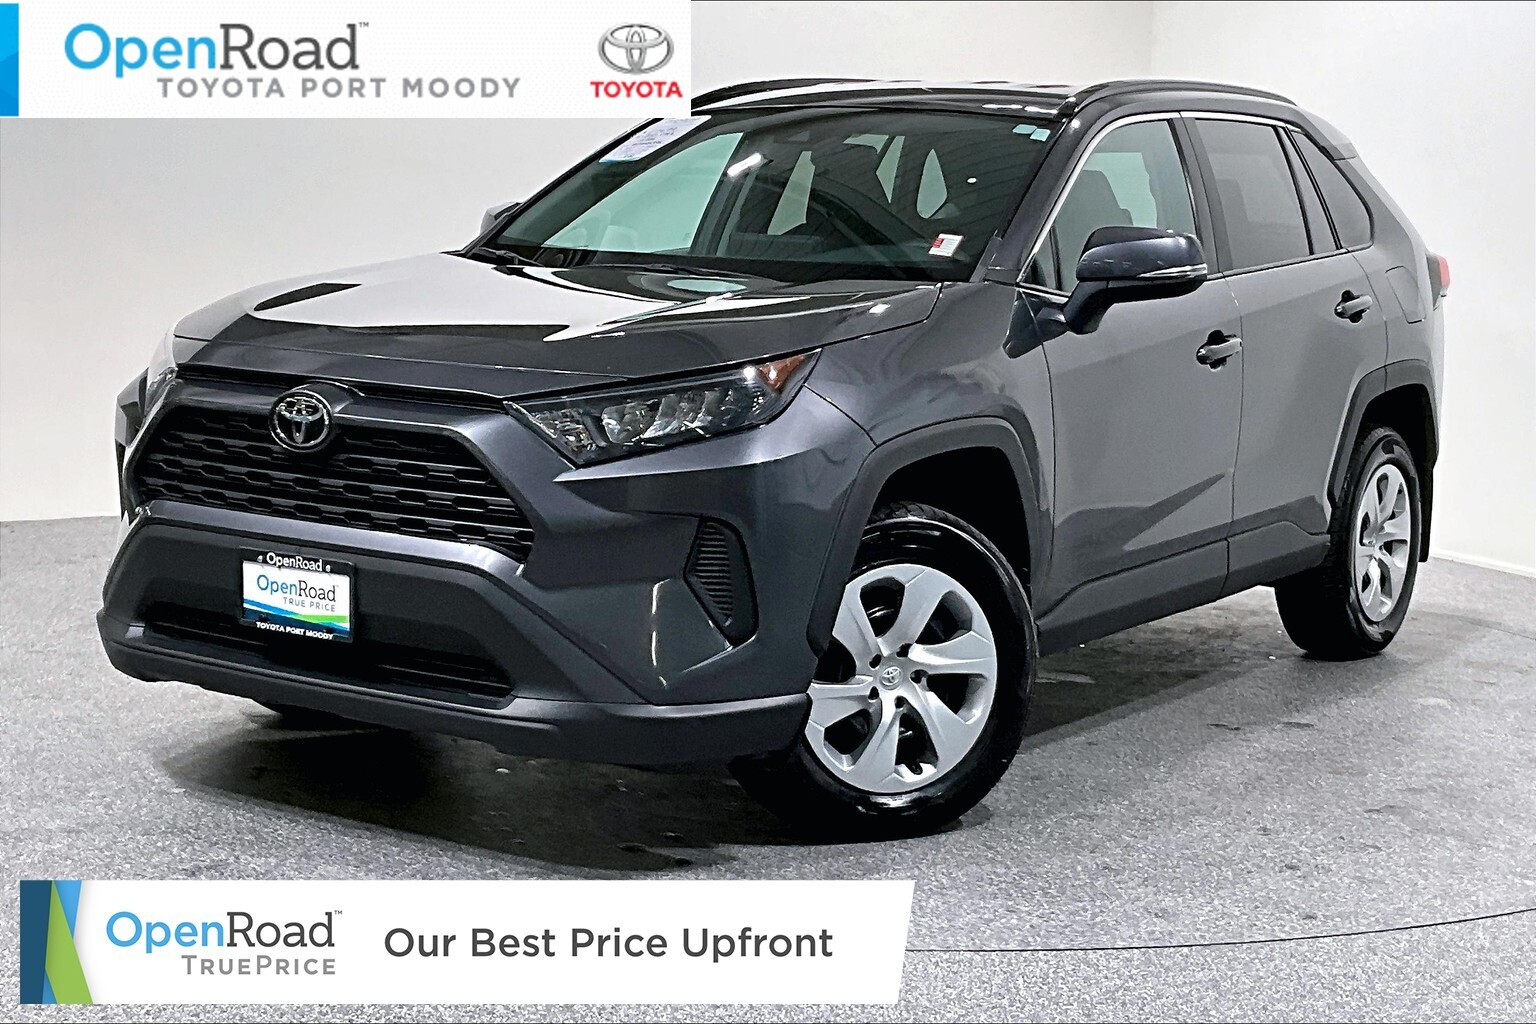 2021 Toyota RAV4 LE AWD |OpenRoad True Price |Local |One Owner |No 